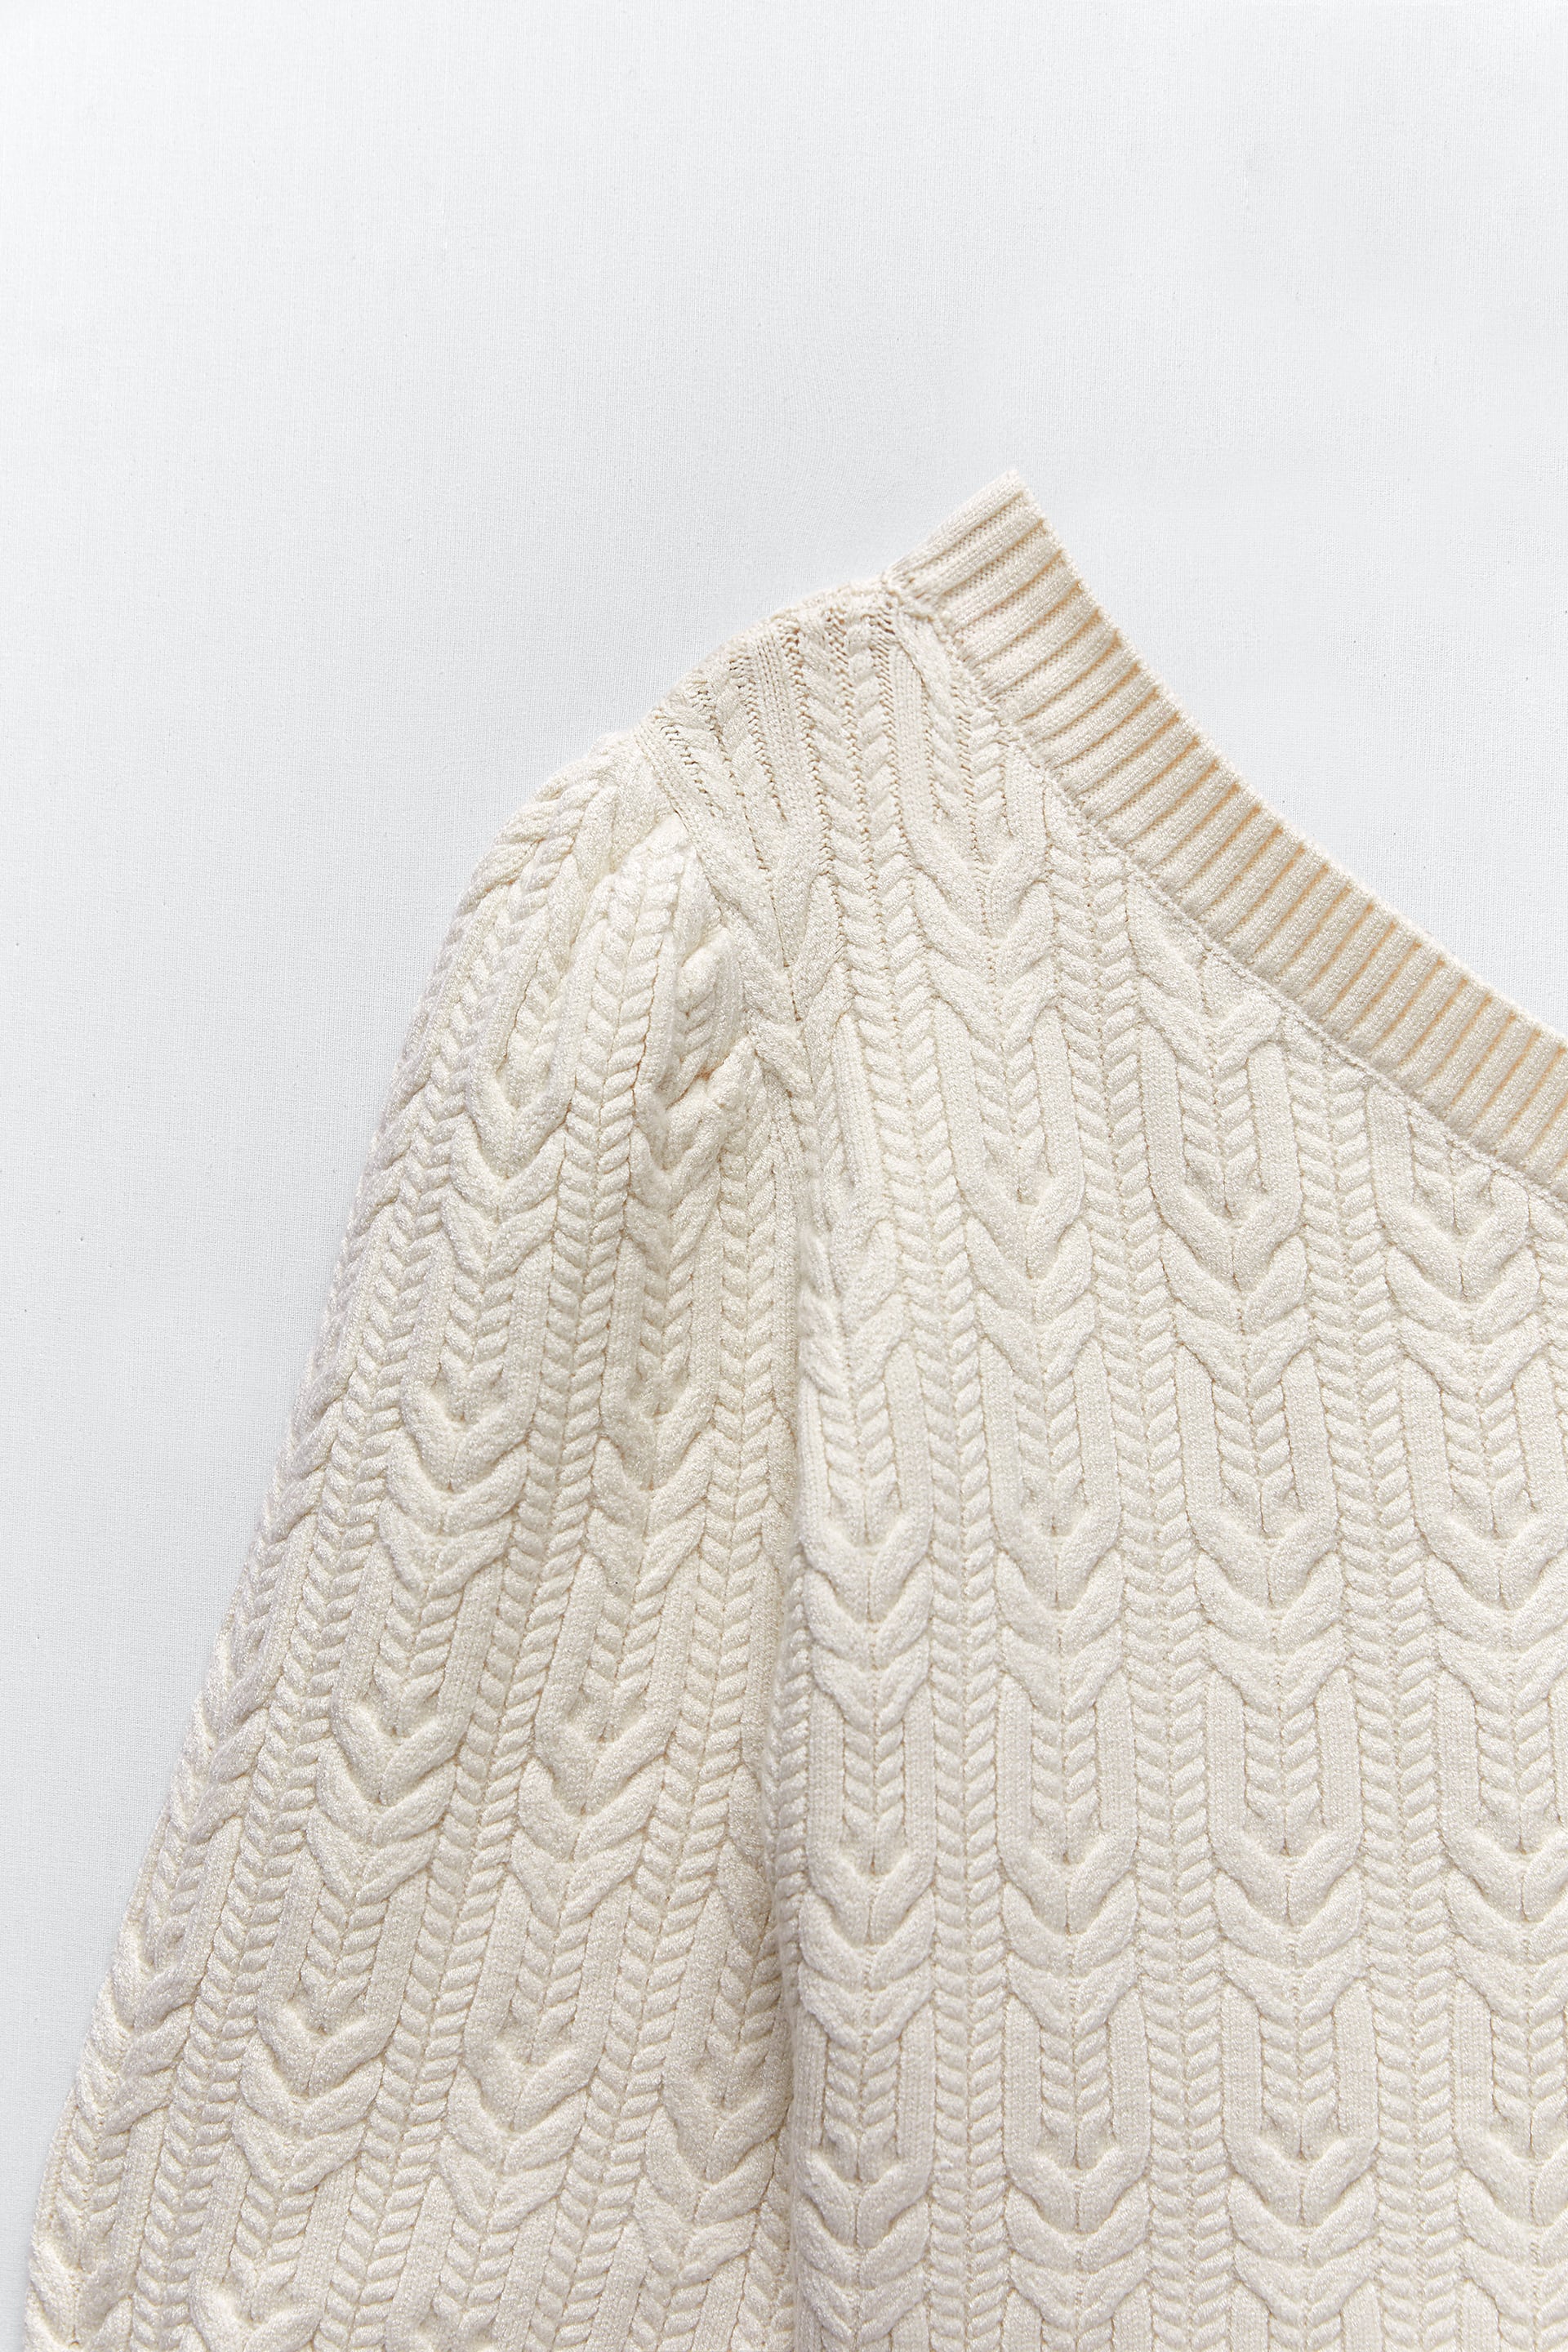 Details about  / ZARA NEW WOMAN RIBBED KNIT SWEATER WITH SHOULDER PADS BONE S-XL 5536//131